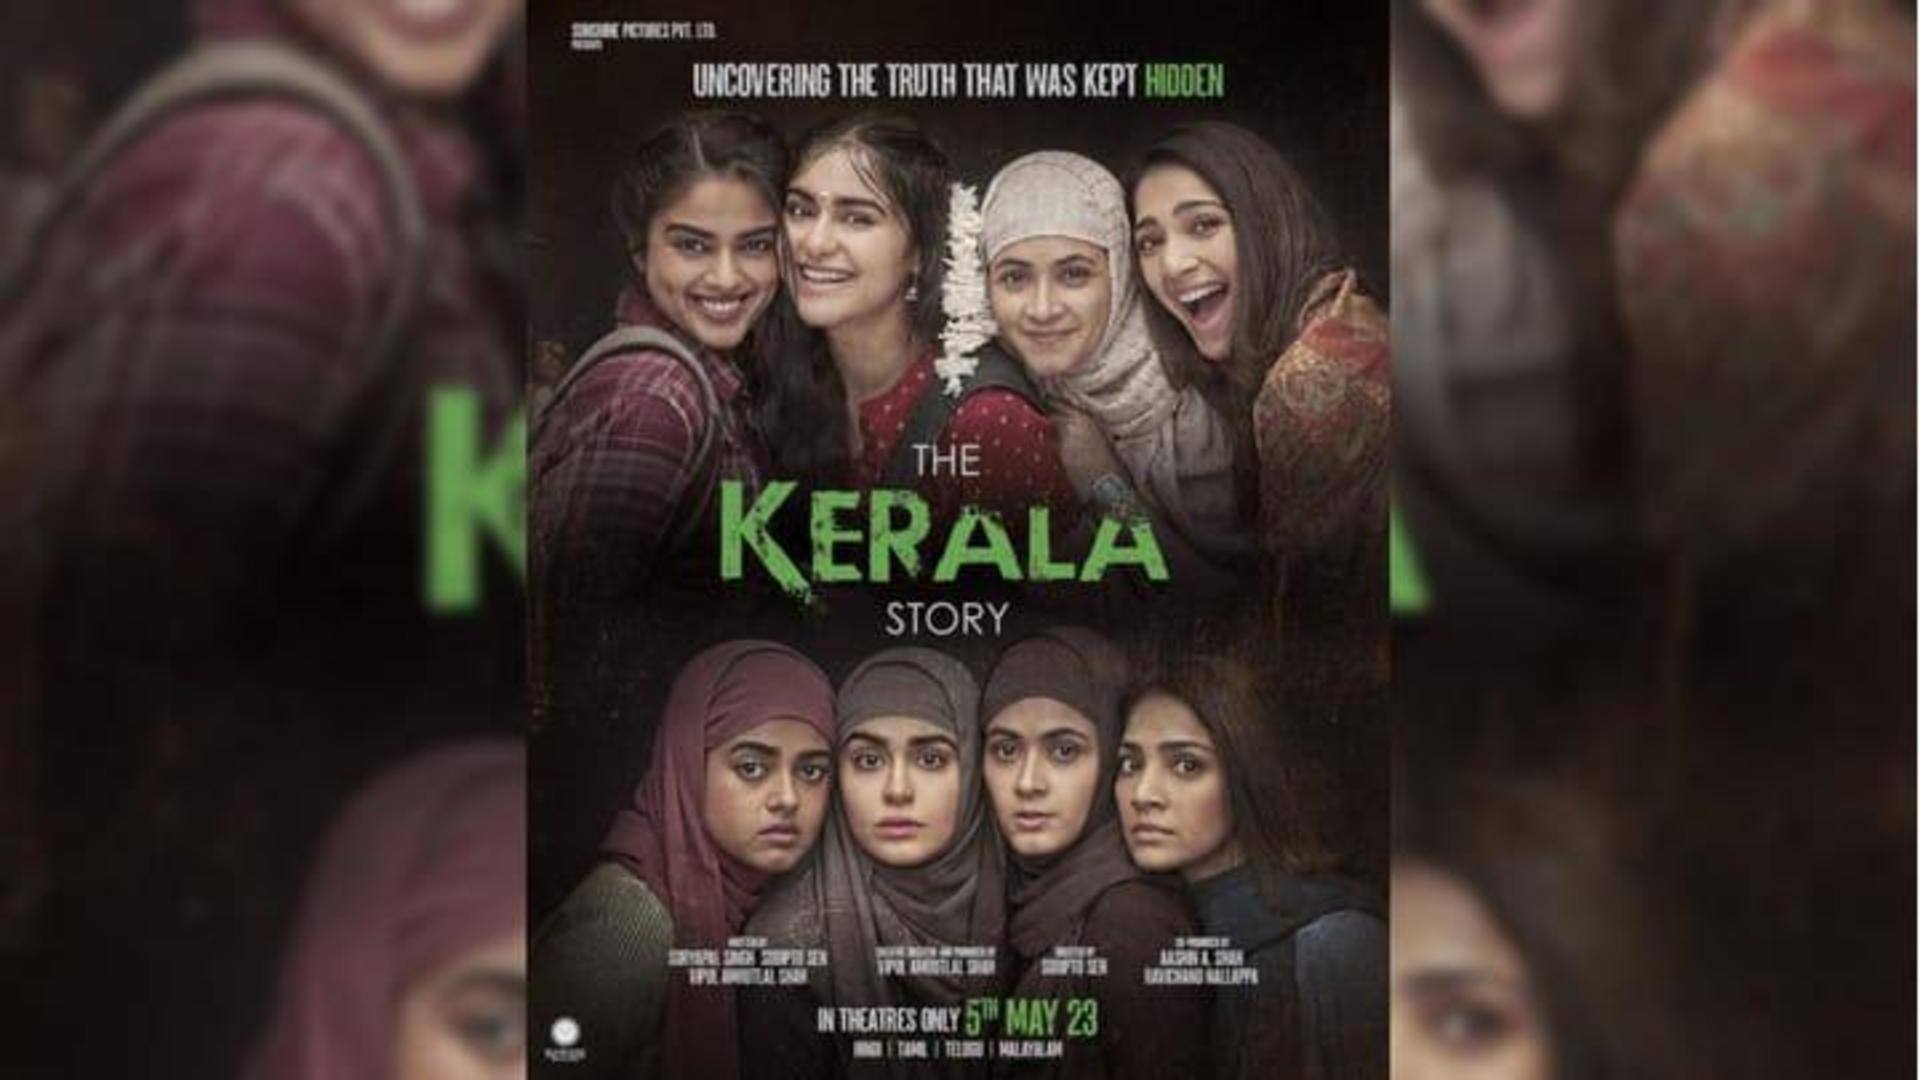 Box office: 'The Kerala Story' inches closer toward Rs. 200cr